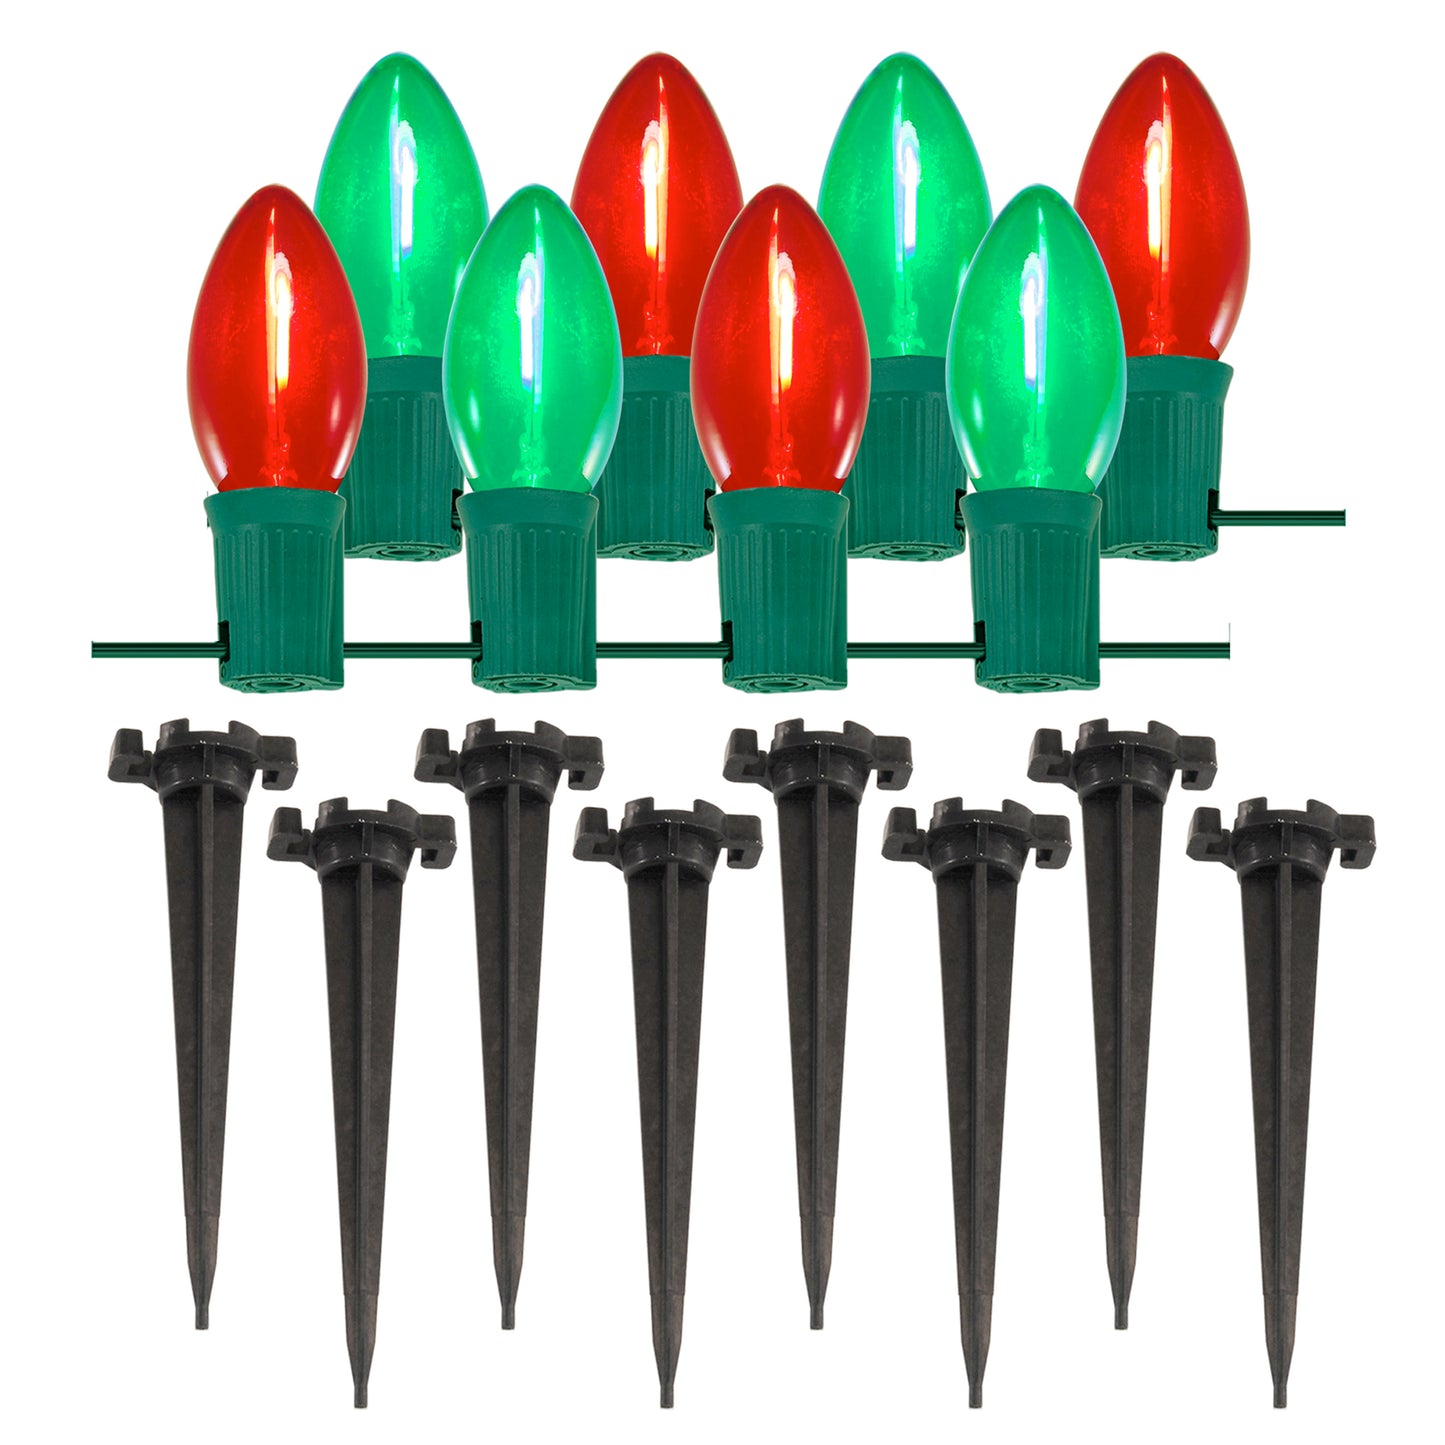 Electric Pathway Lights with 8 Red and Green LED Bulbs